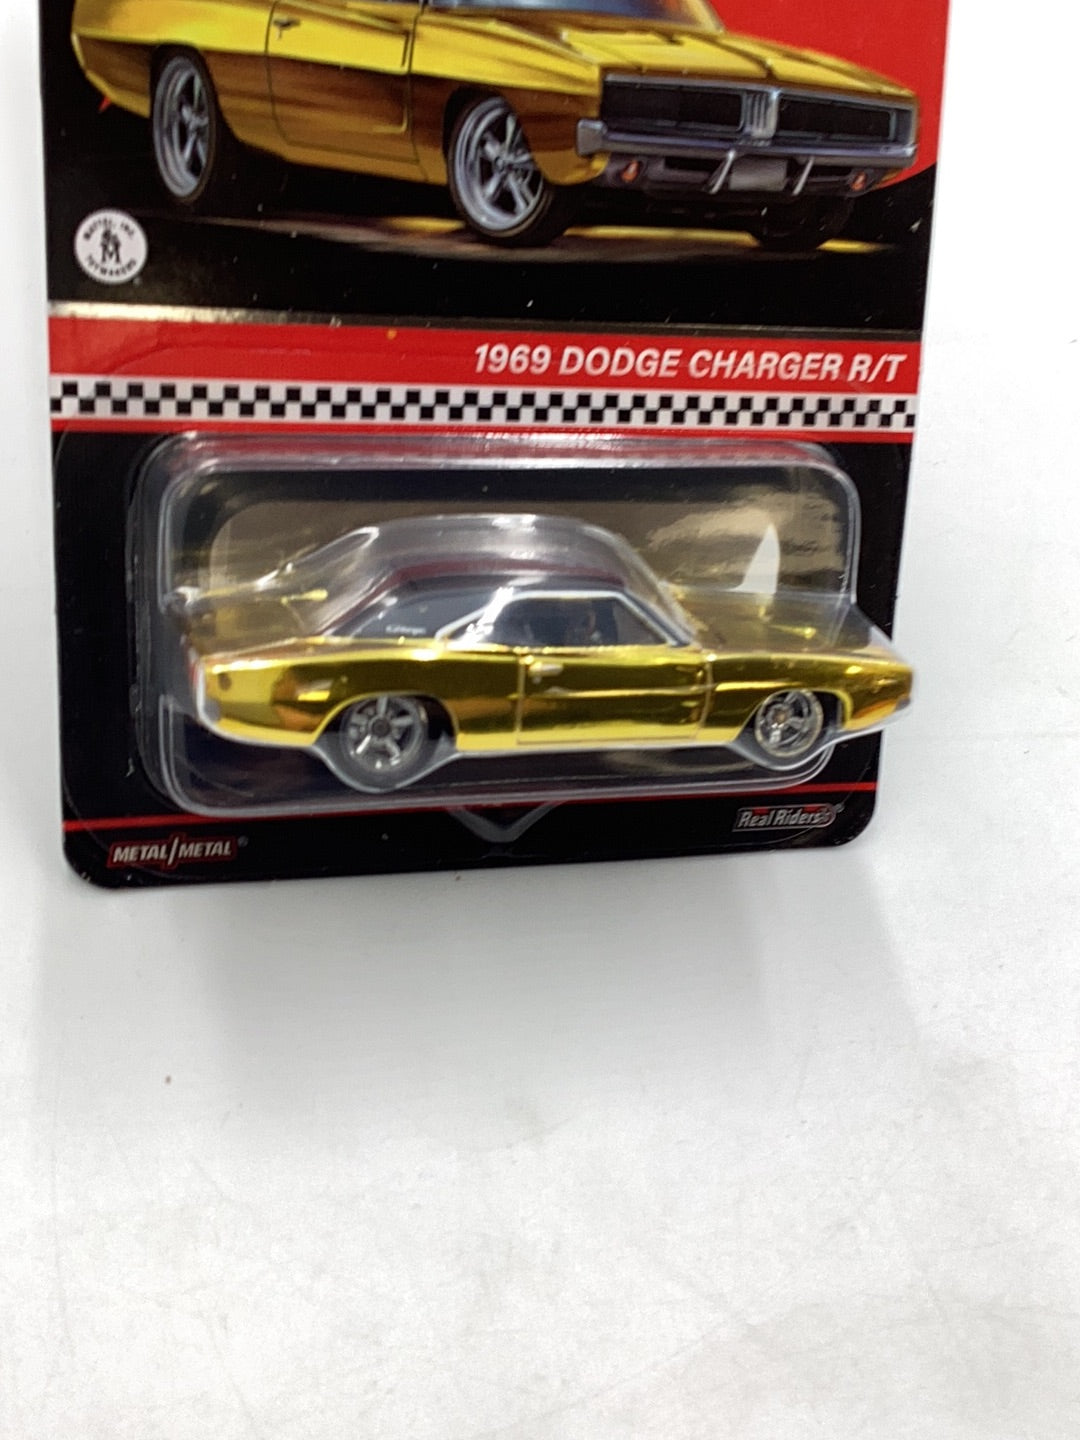 Hot Wheels redline club RLC 1969 Dodge Charger R/T real riders